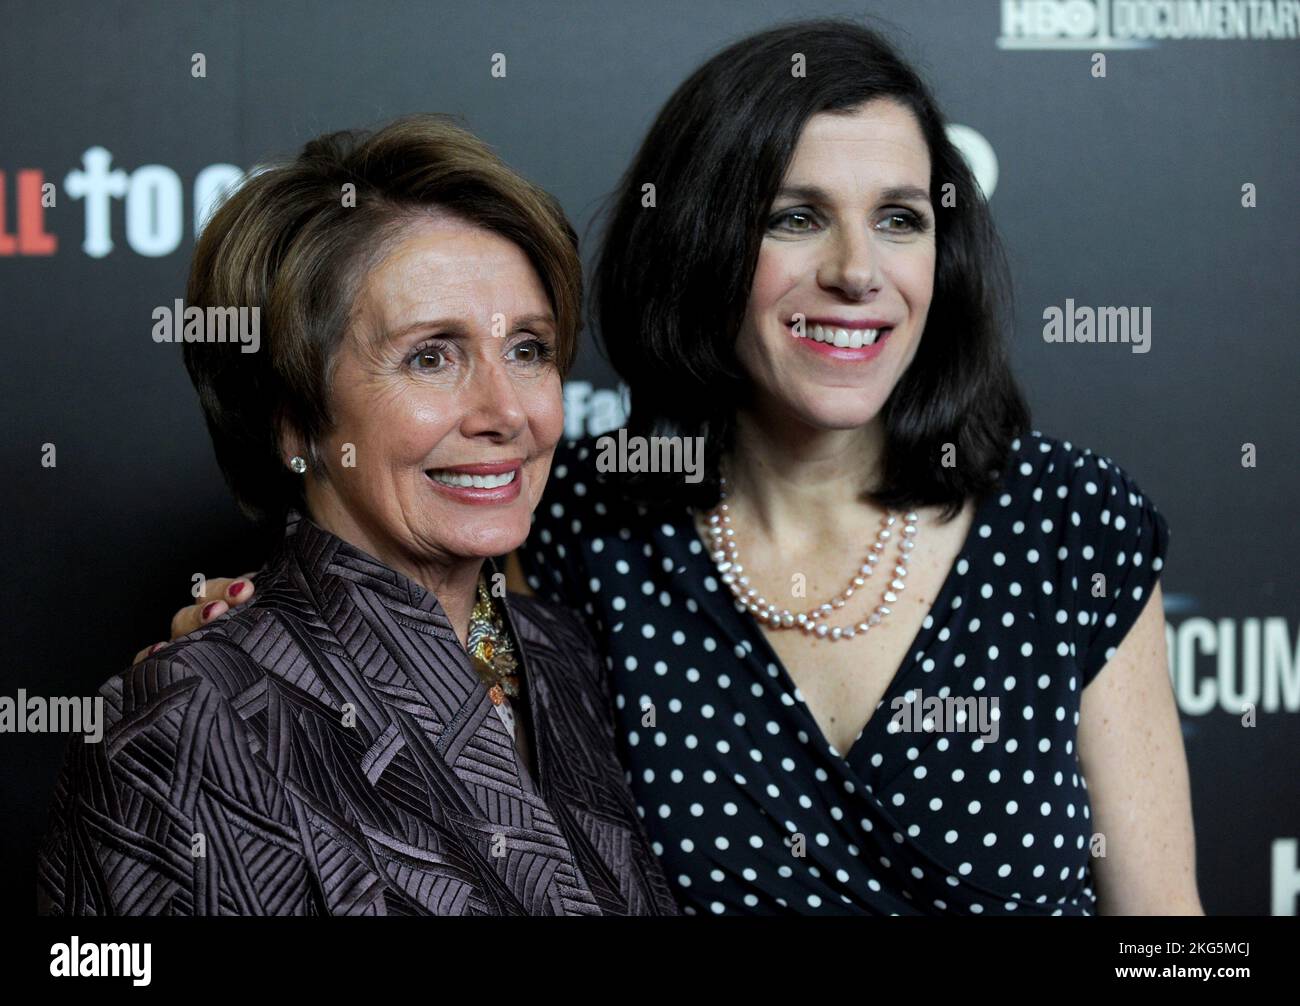 Manhattan, United States Of America. 31st Dec, 2008. NEW YORK, NY - MARCH 21: Nancy Pelosi Alexandra Pelosi attends the New York premiere of the HBO documentary Fall to Grace at Time Warner Center Screening Room on March 21, 2013 in New York City.y People: Nancy Pelosi Alexandra Pelosi Credit: Storms Media Group/Alamy Live News Stock Photo